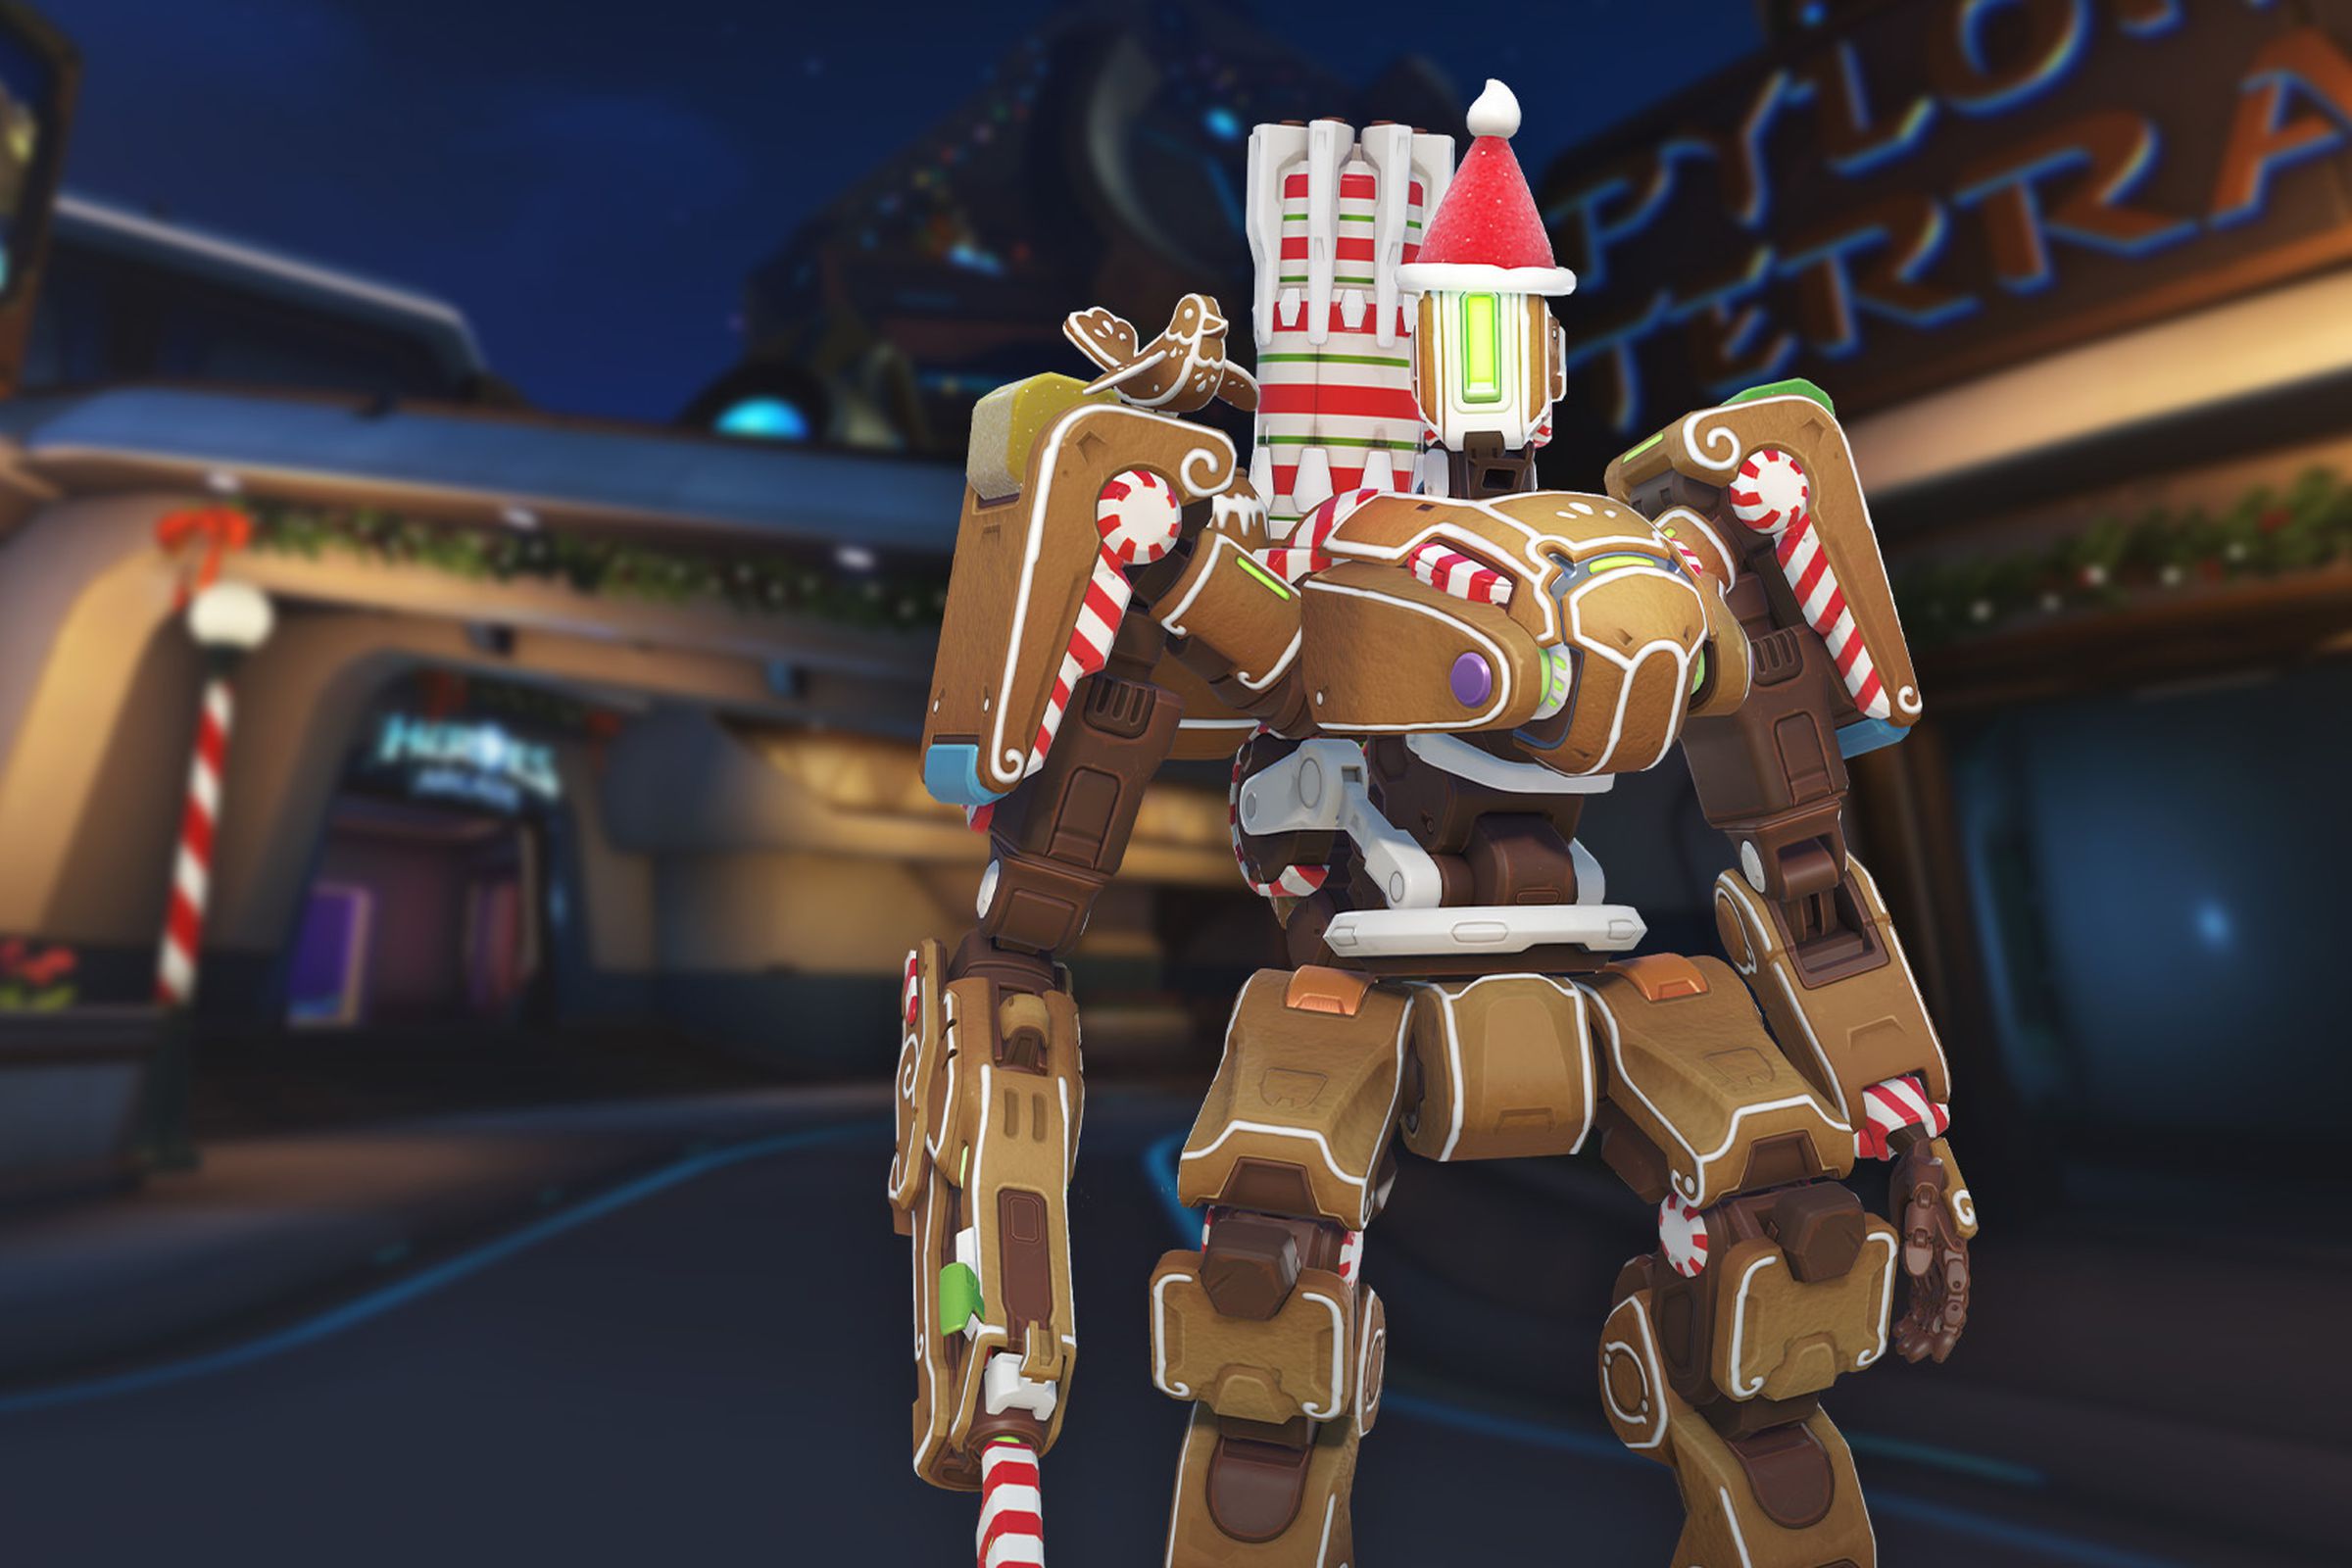 Screenshot of Overwatch 2’s holiday Bastion skin featuring a robot made to look like a gingerbread house